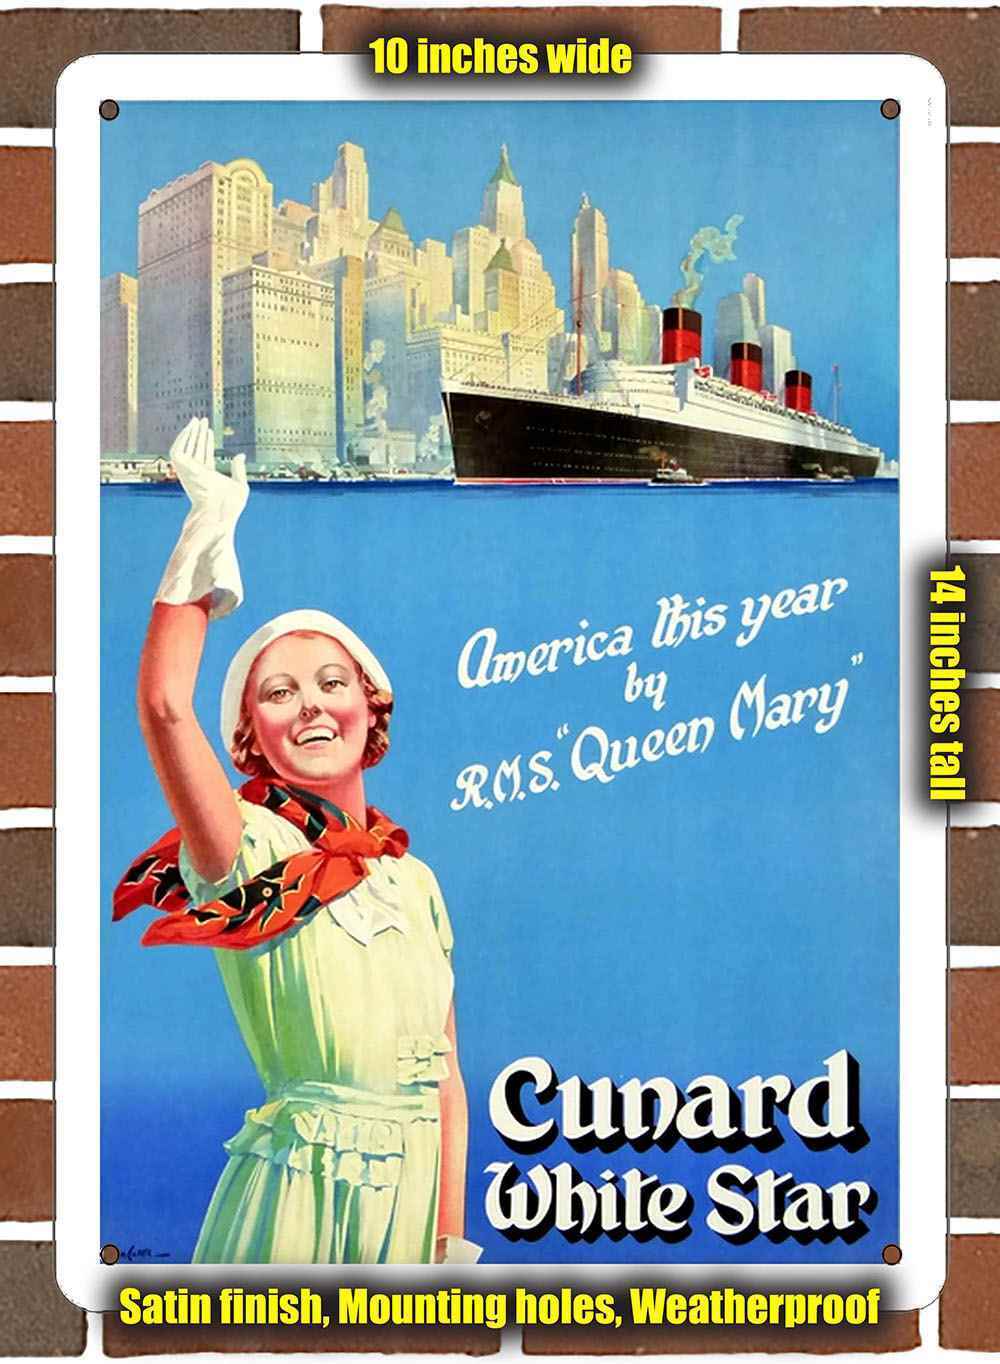 Metal Sign - 1939 Cunard White Star R.M.S. Queen Mary- 10x14 inches